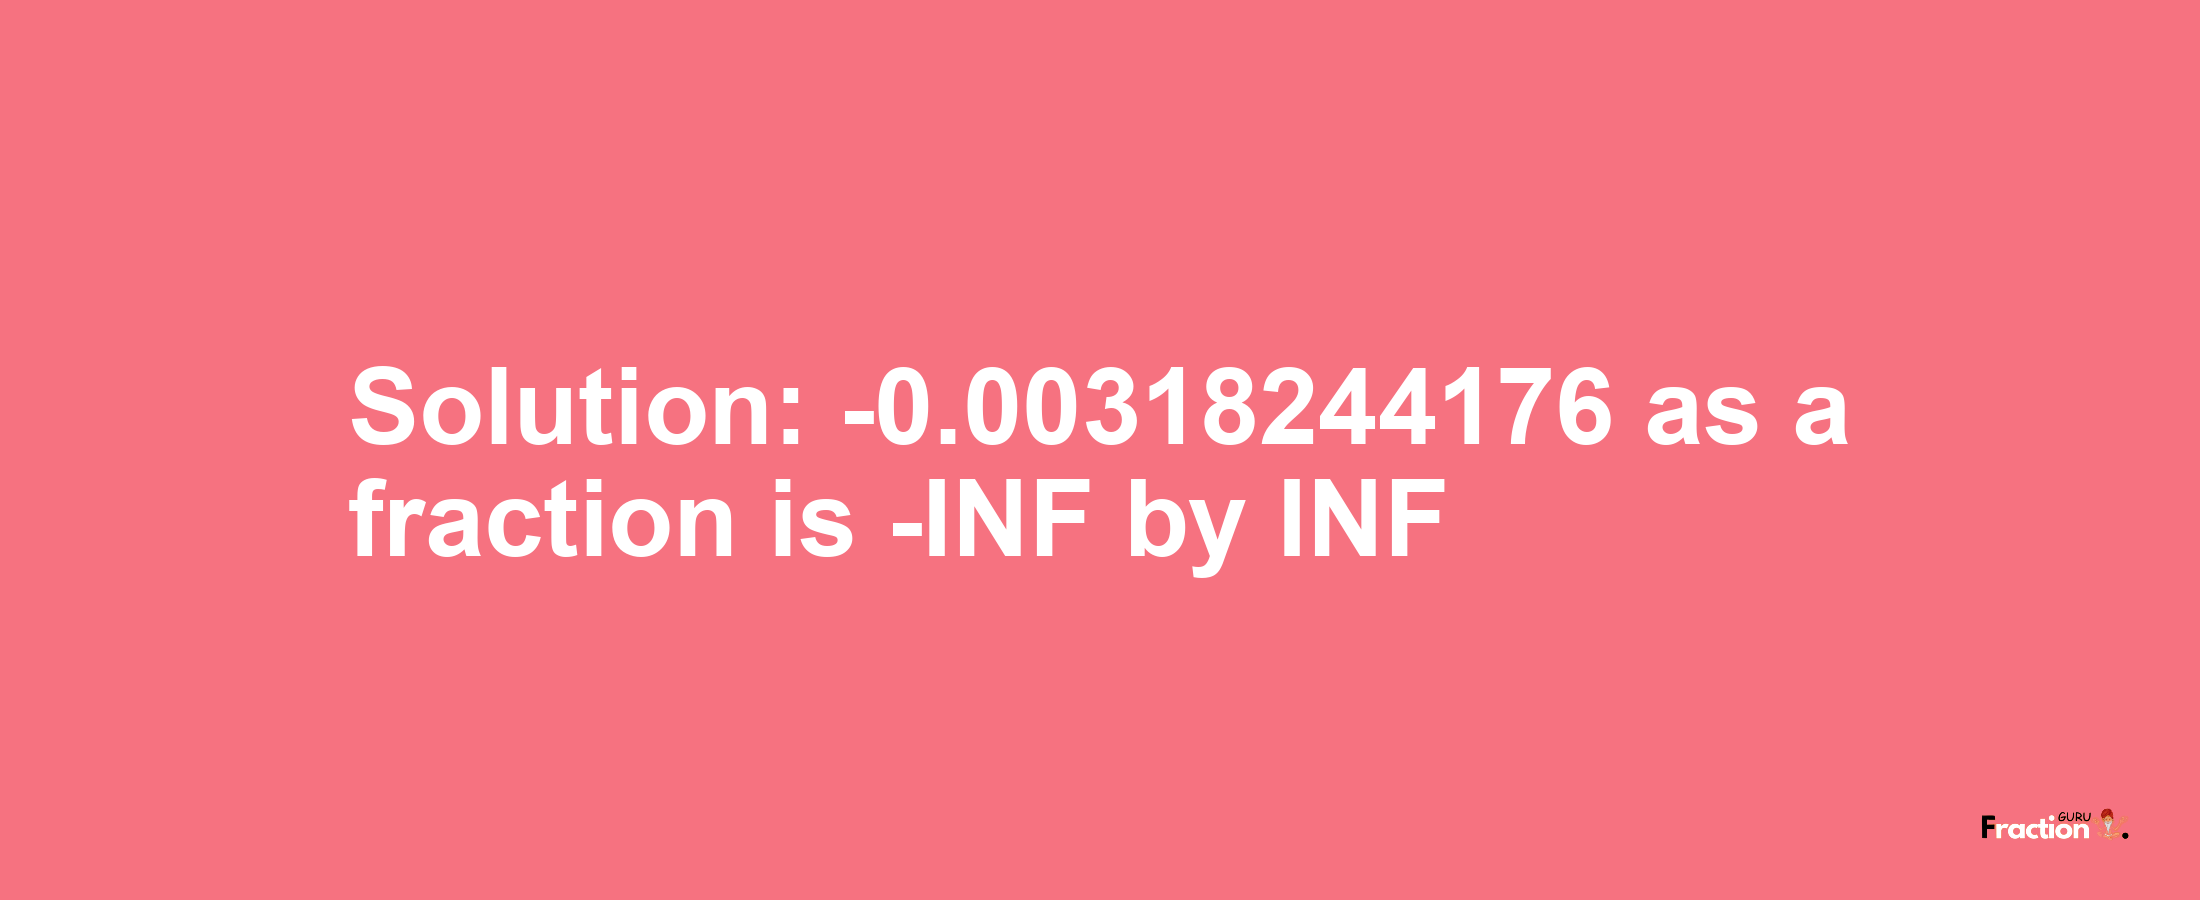 Solution:-0.00318244176 as a fraction is -INF/INF